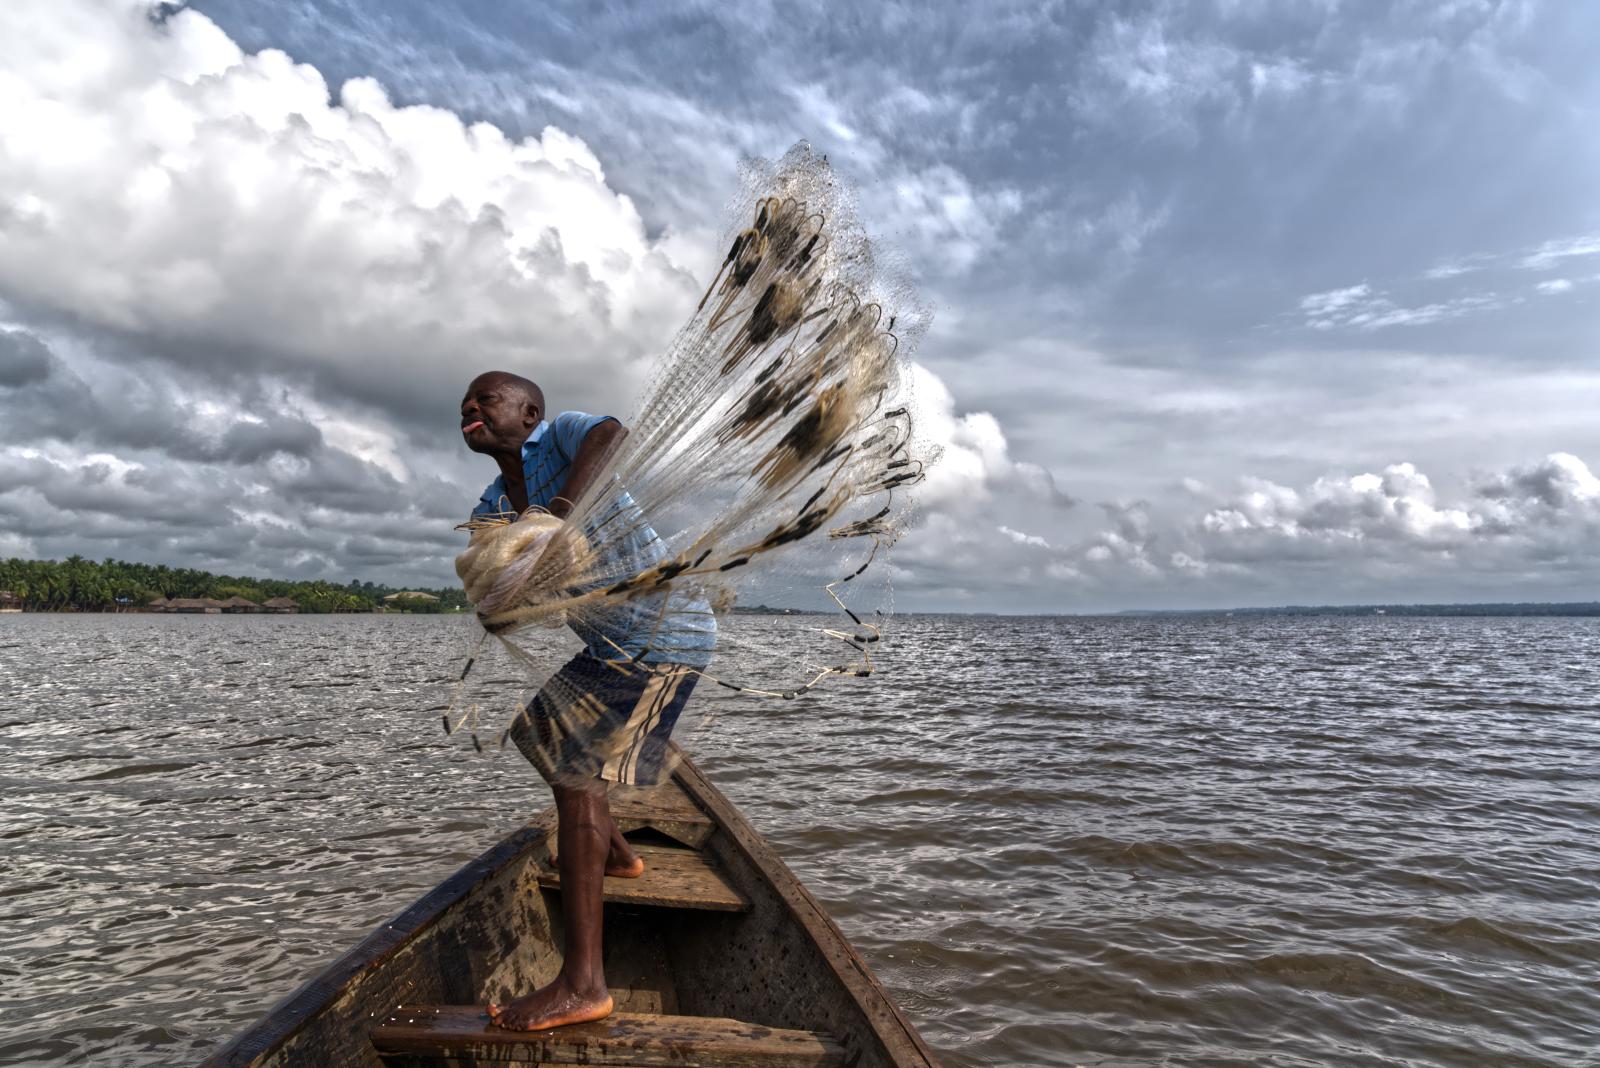 Fishing techniques in Benin | Buy this image